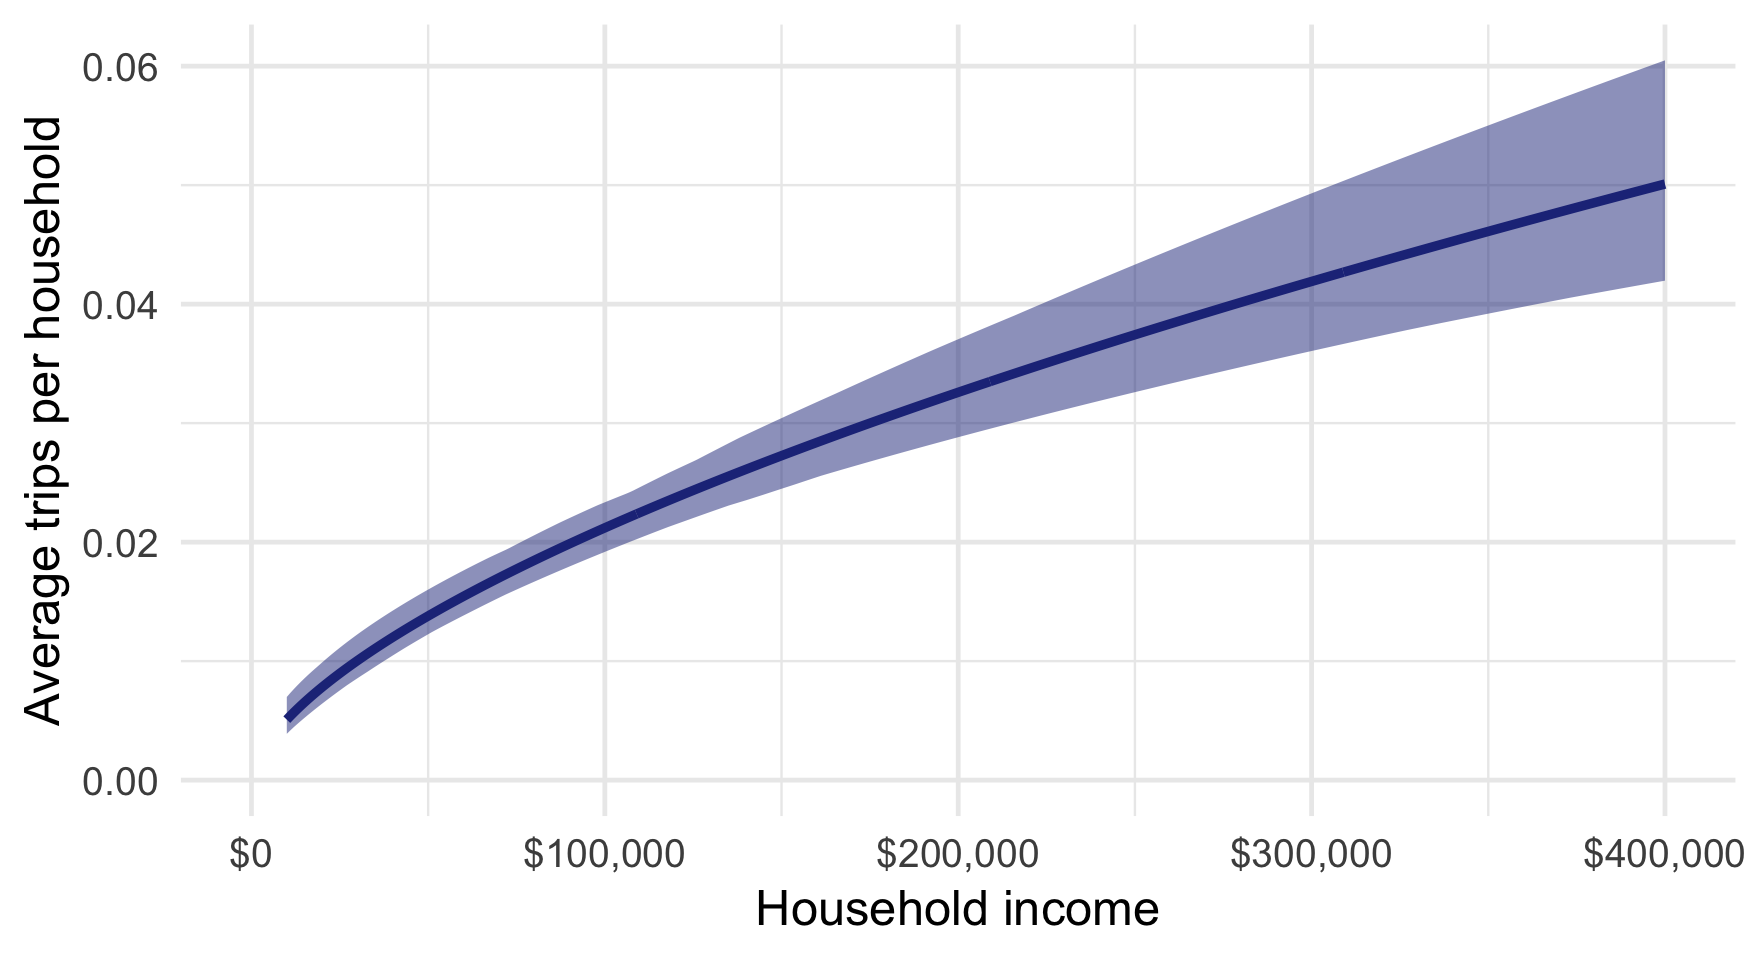 Trips per household, by income